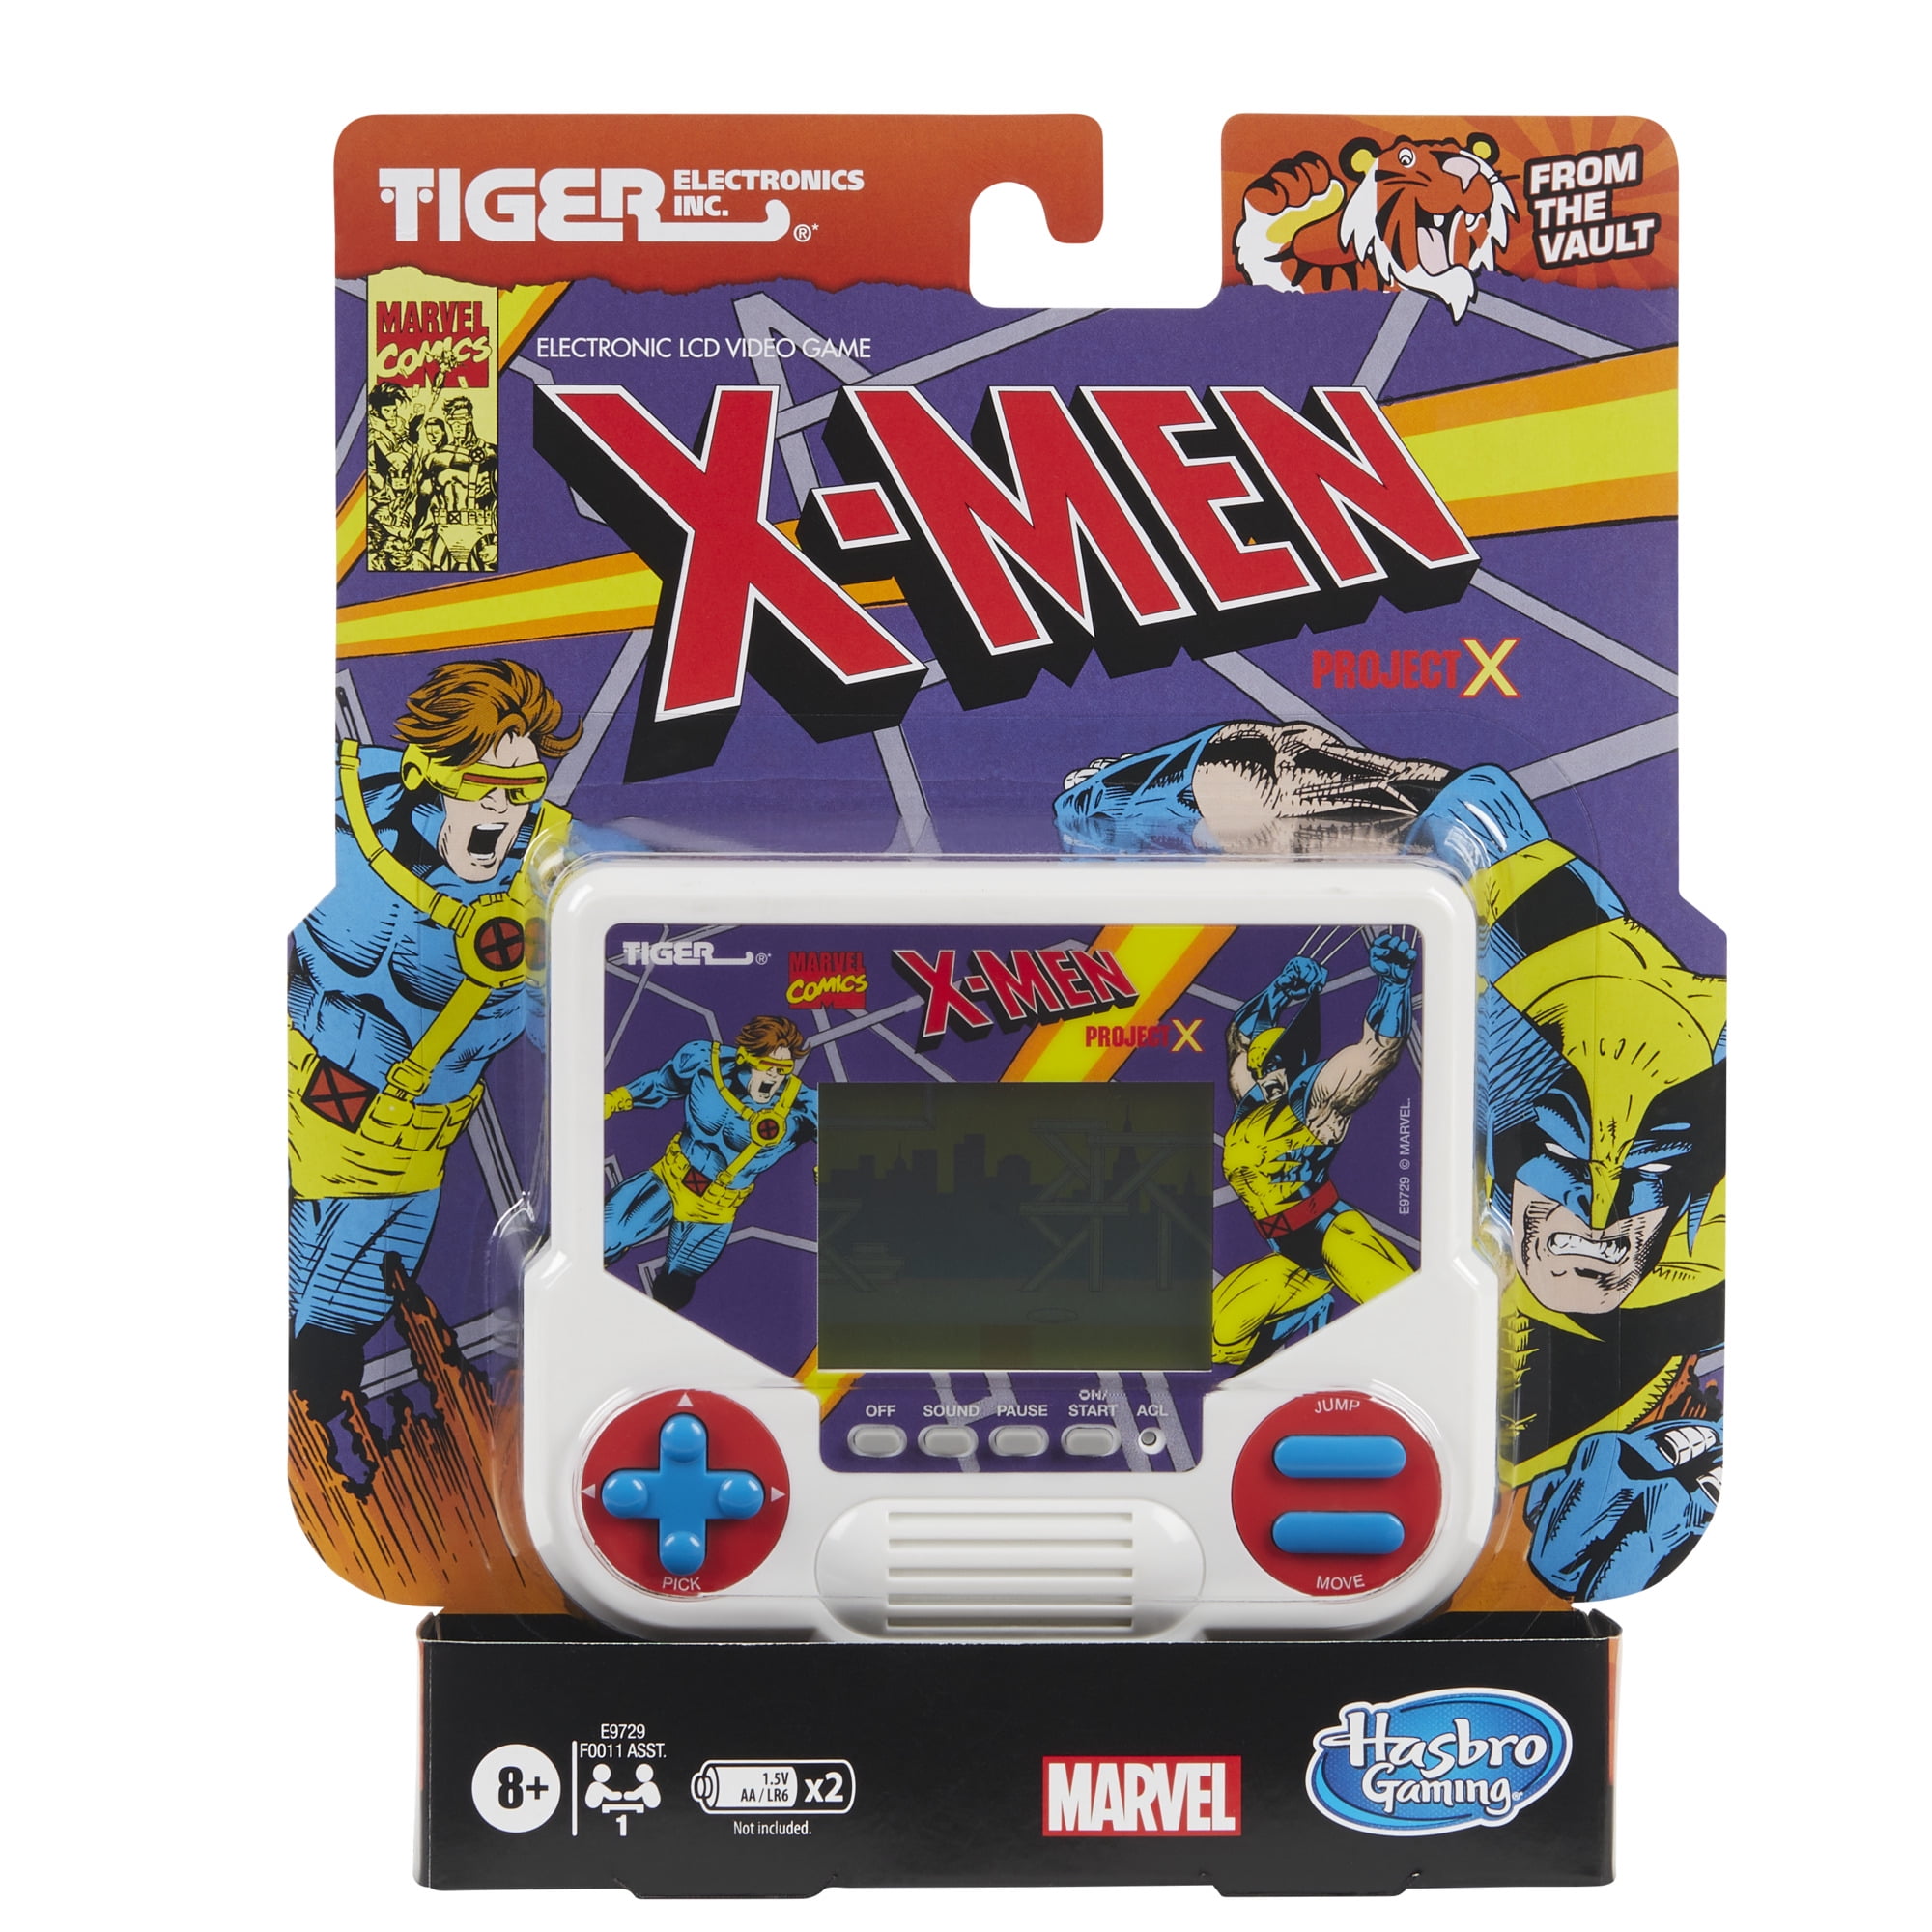 Hasbro X-men Project X Tiger Electronics Handheld LCD Game Retro 1992 Reissue for sale online 